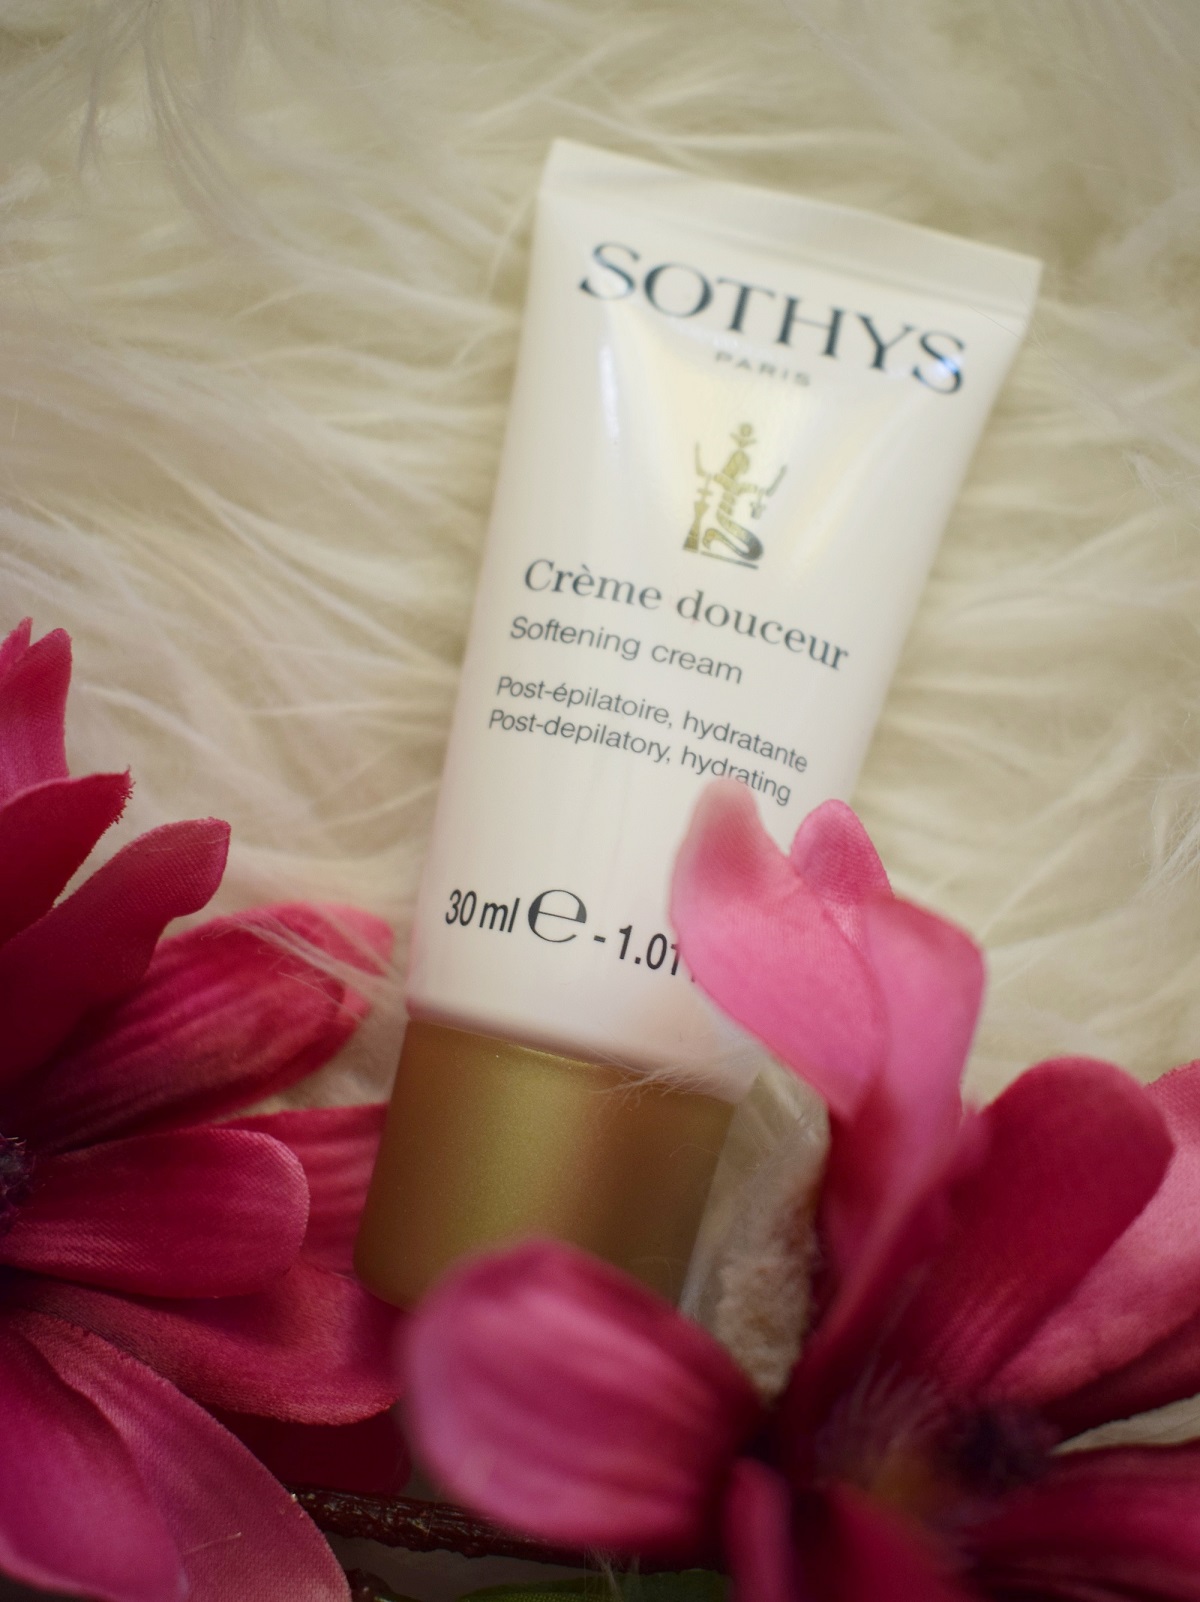 Sothys Beautybox Sommeredition Post-epil Creme